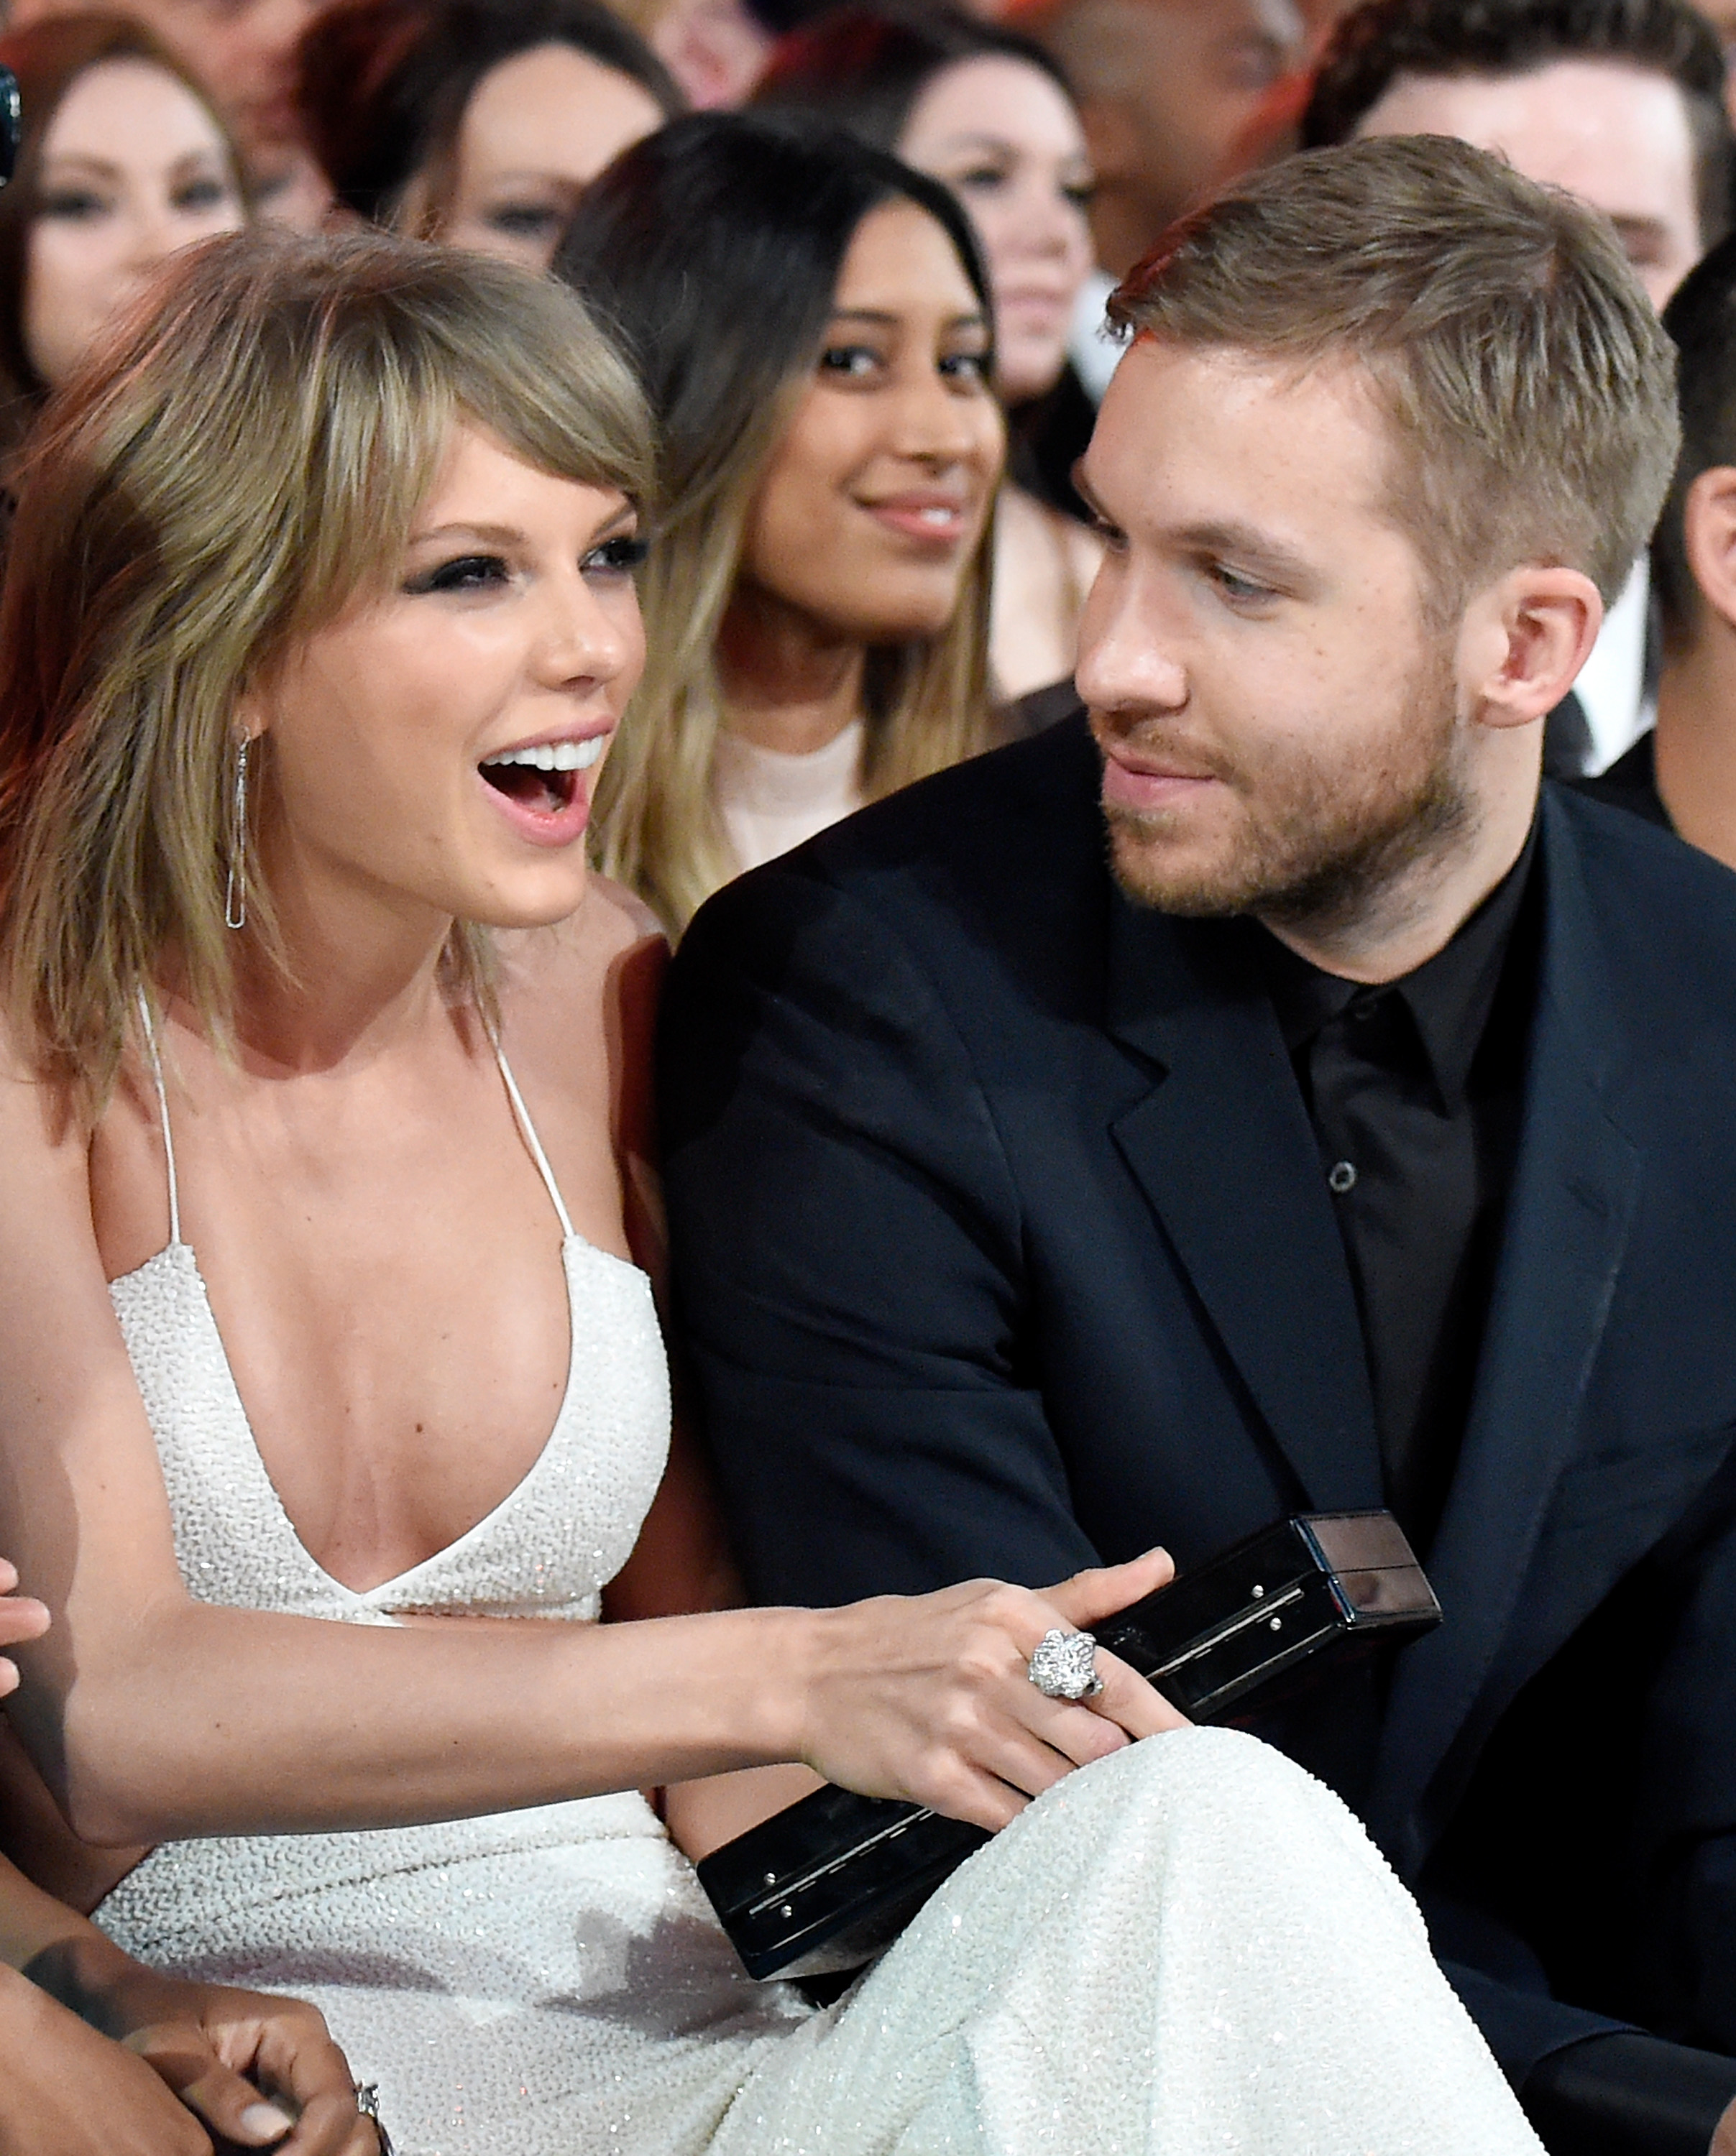  Taylor Swift and Calvin Harris made an adorable couple